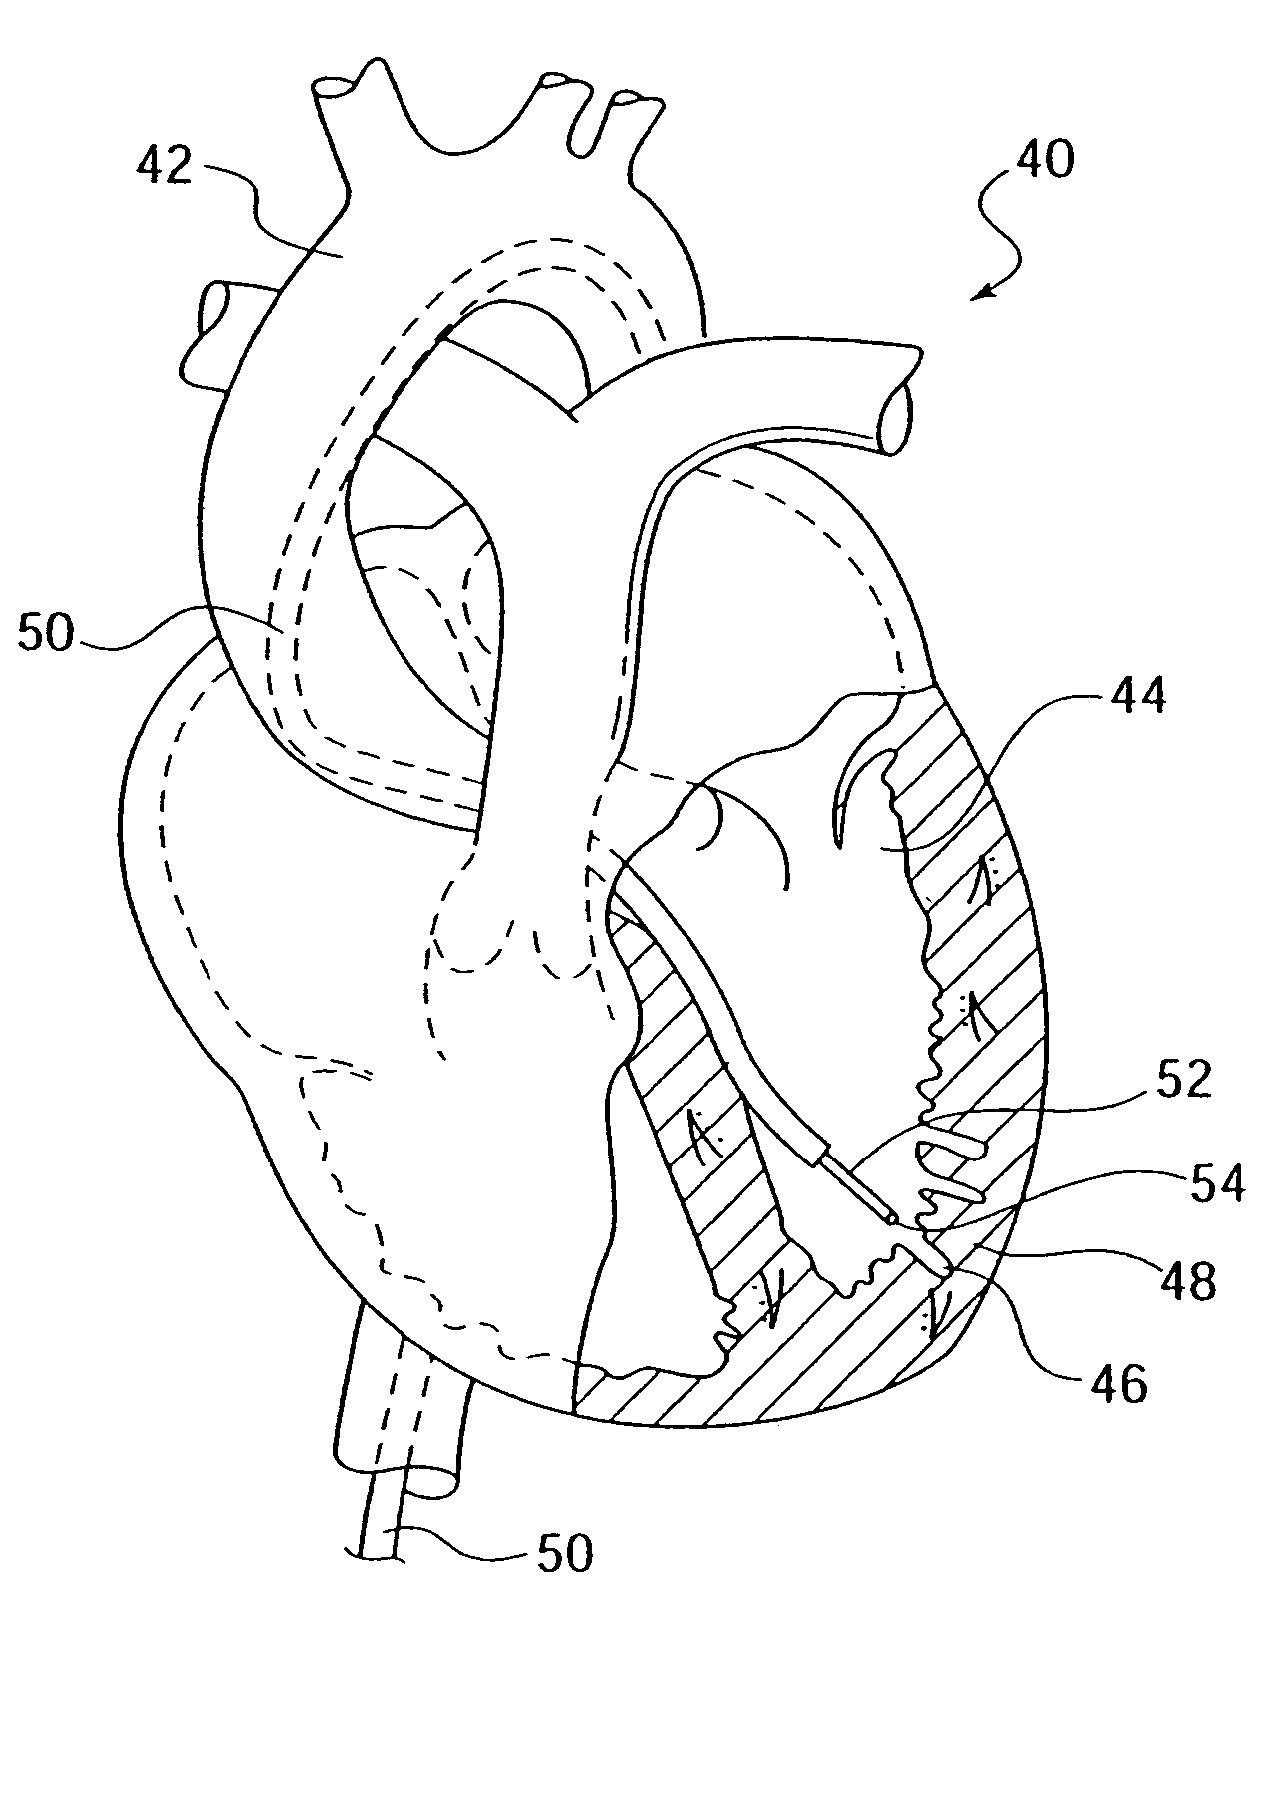 Elongated medical device with functional distal end